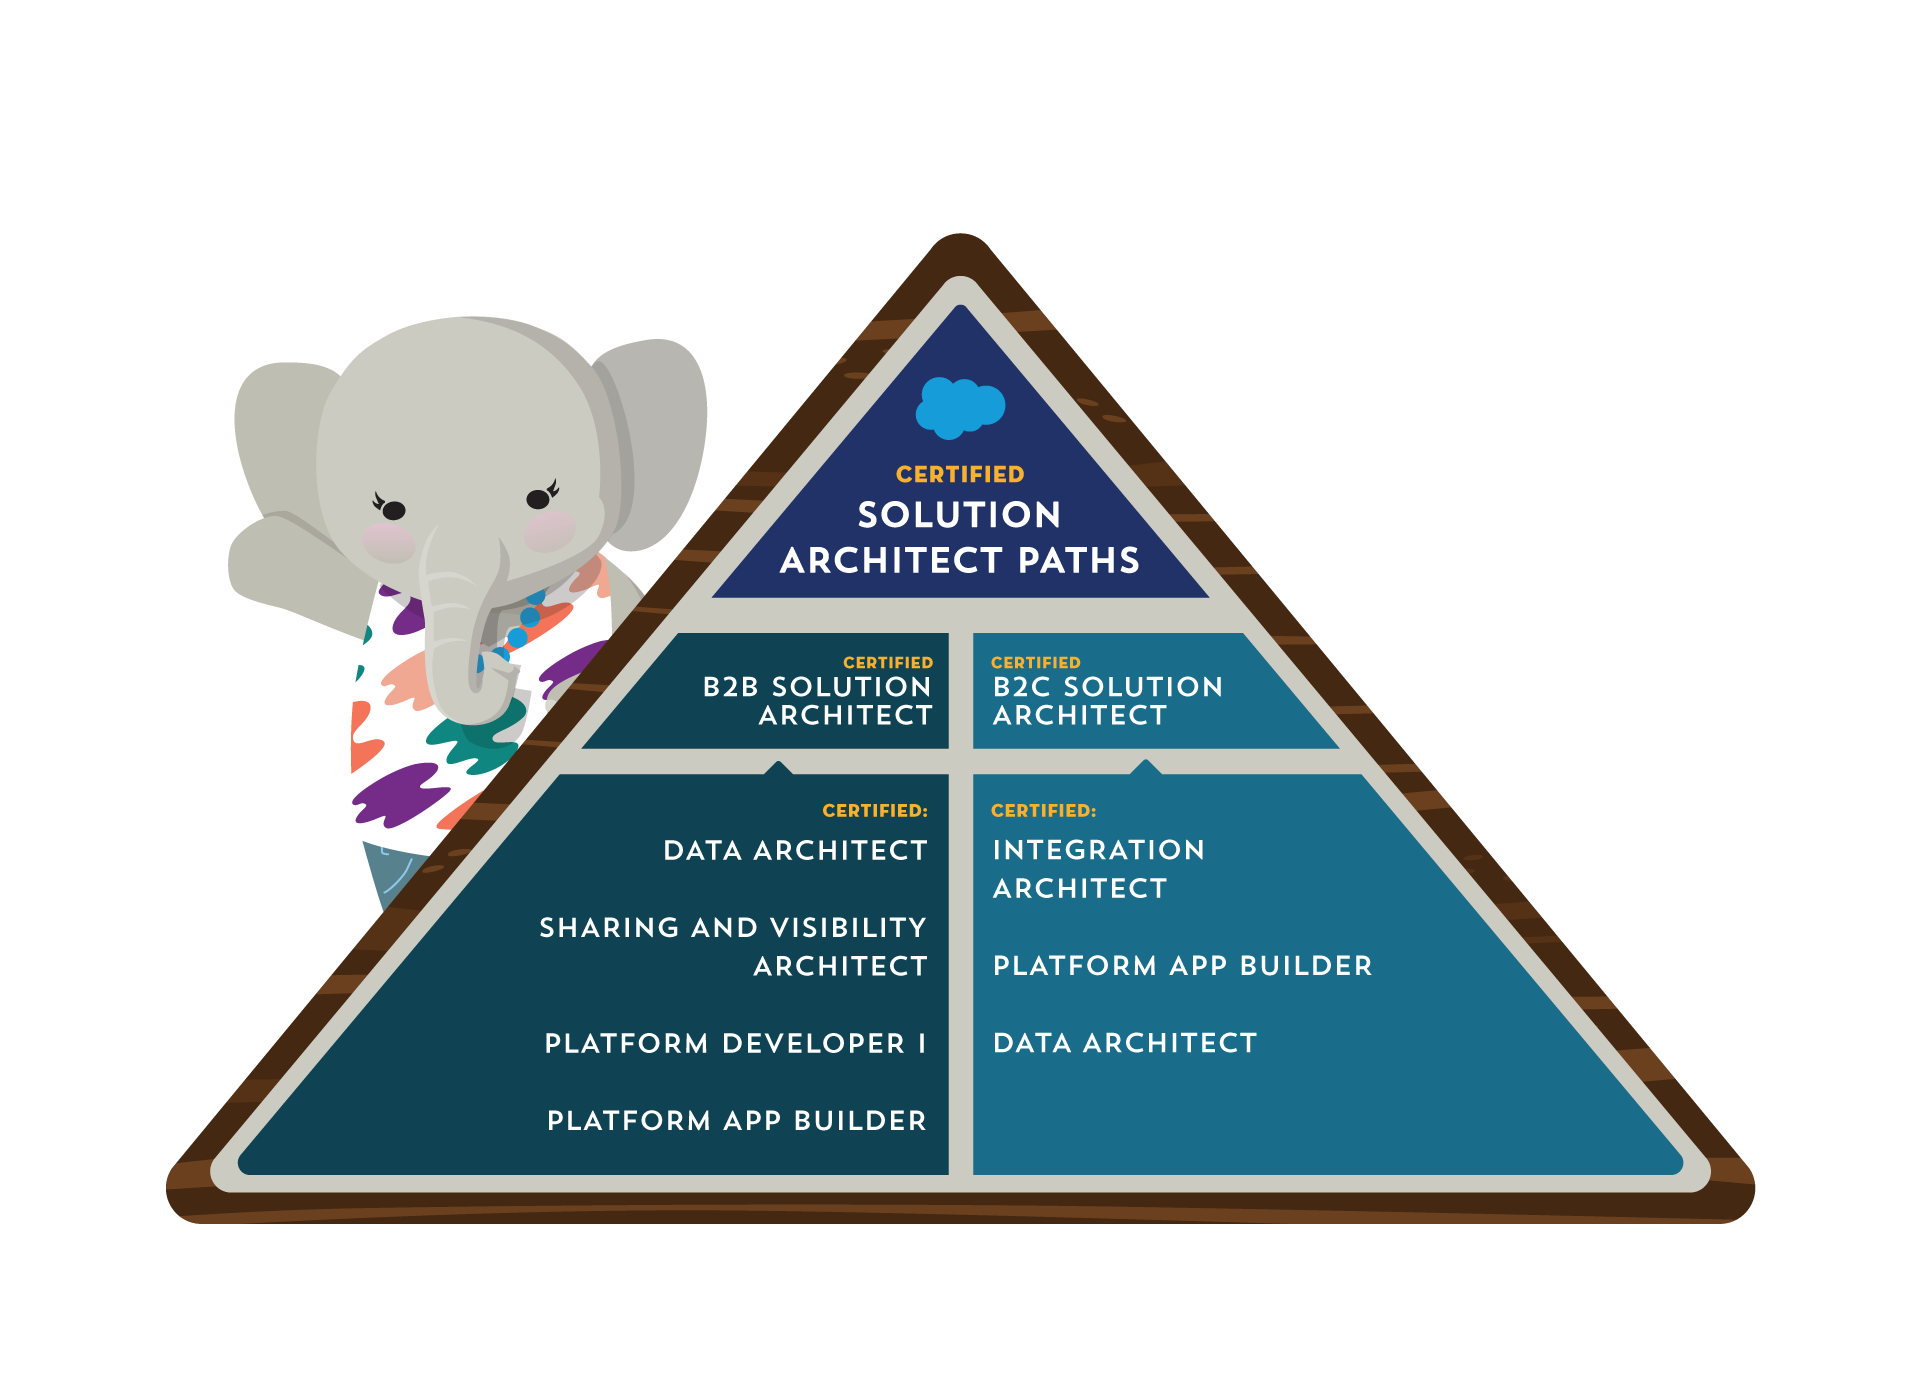 Salesforce Architect Journey certification path suggesting certifications for certain specializations and two domain architecture certifications: Application Architect and System Architect.